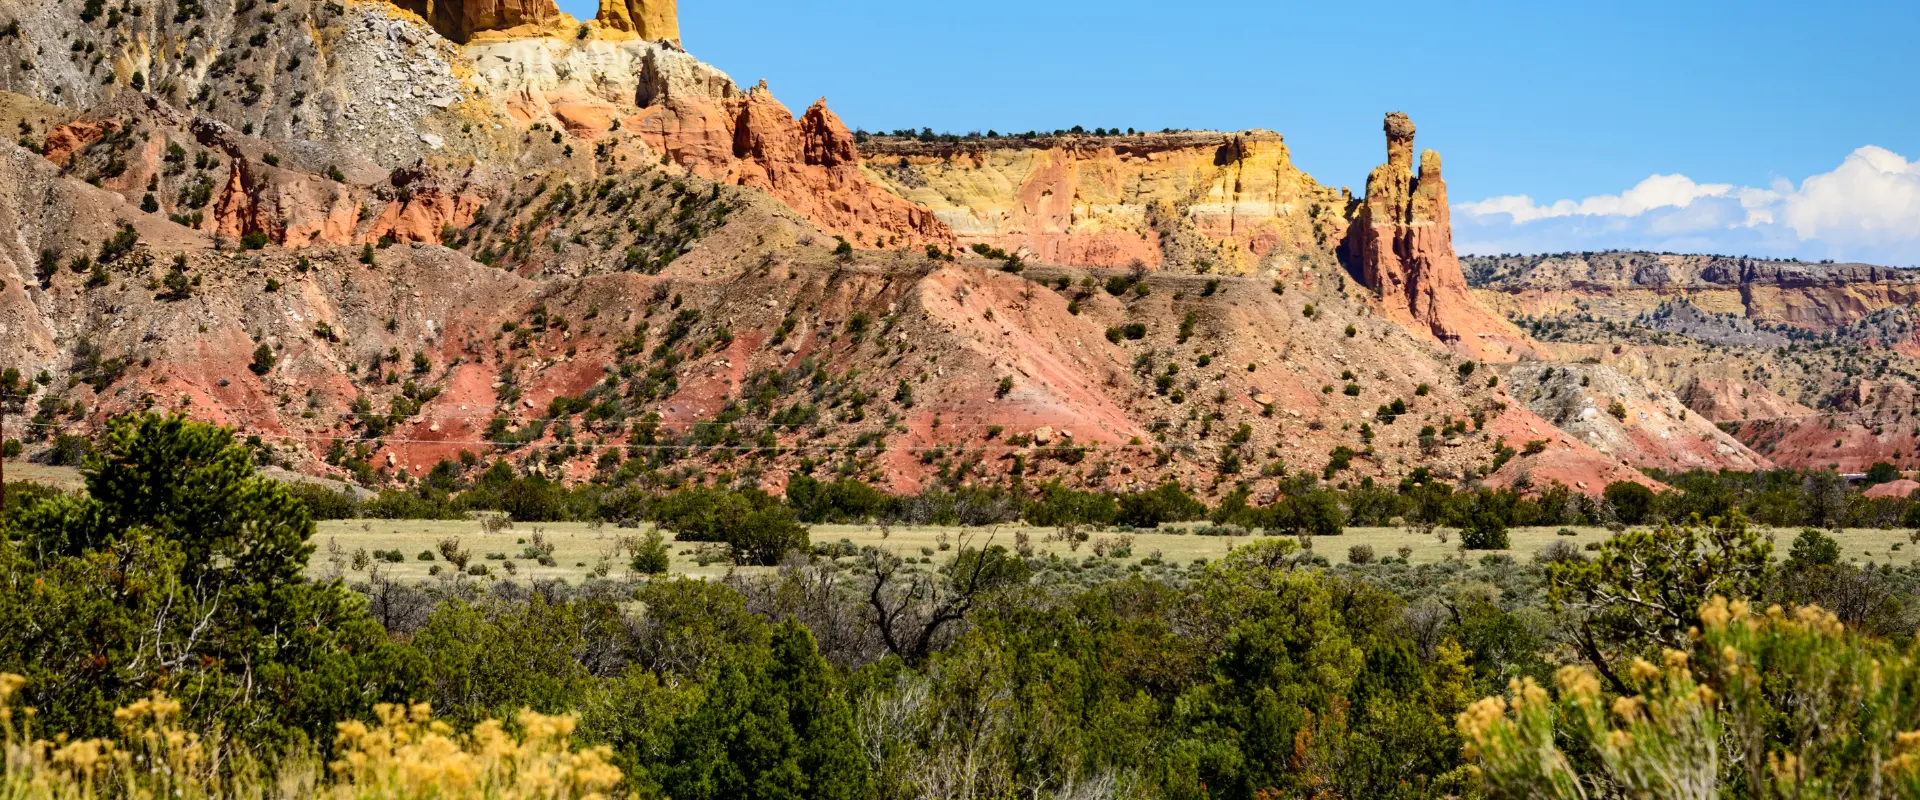 Ghost ranch ladder to the moon festival